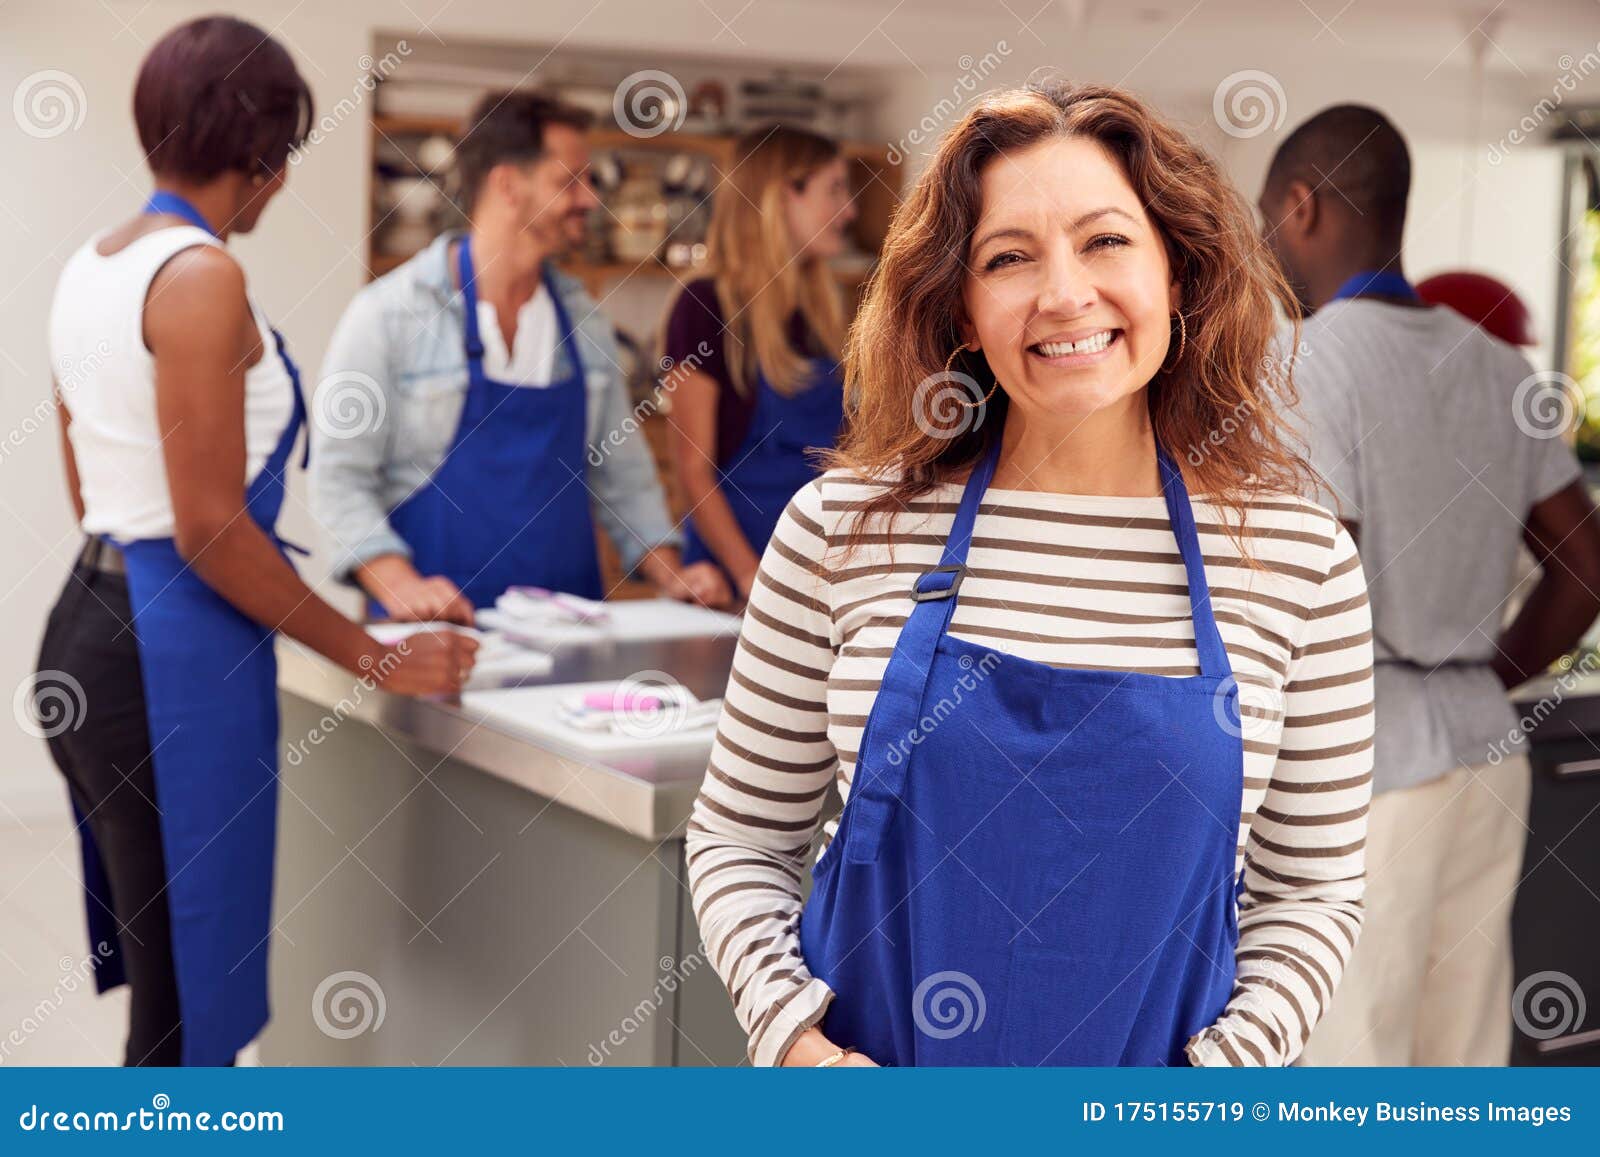 portrait of smiling mature woman wearing apron taking part in cookery class in kitchen